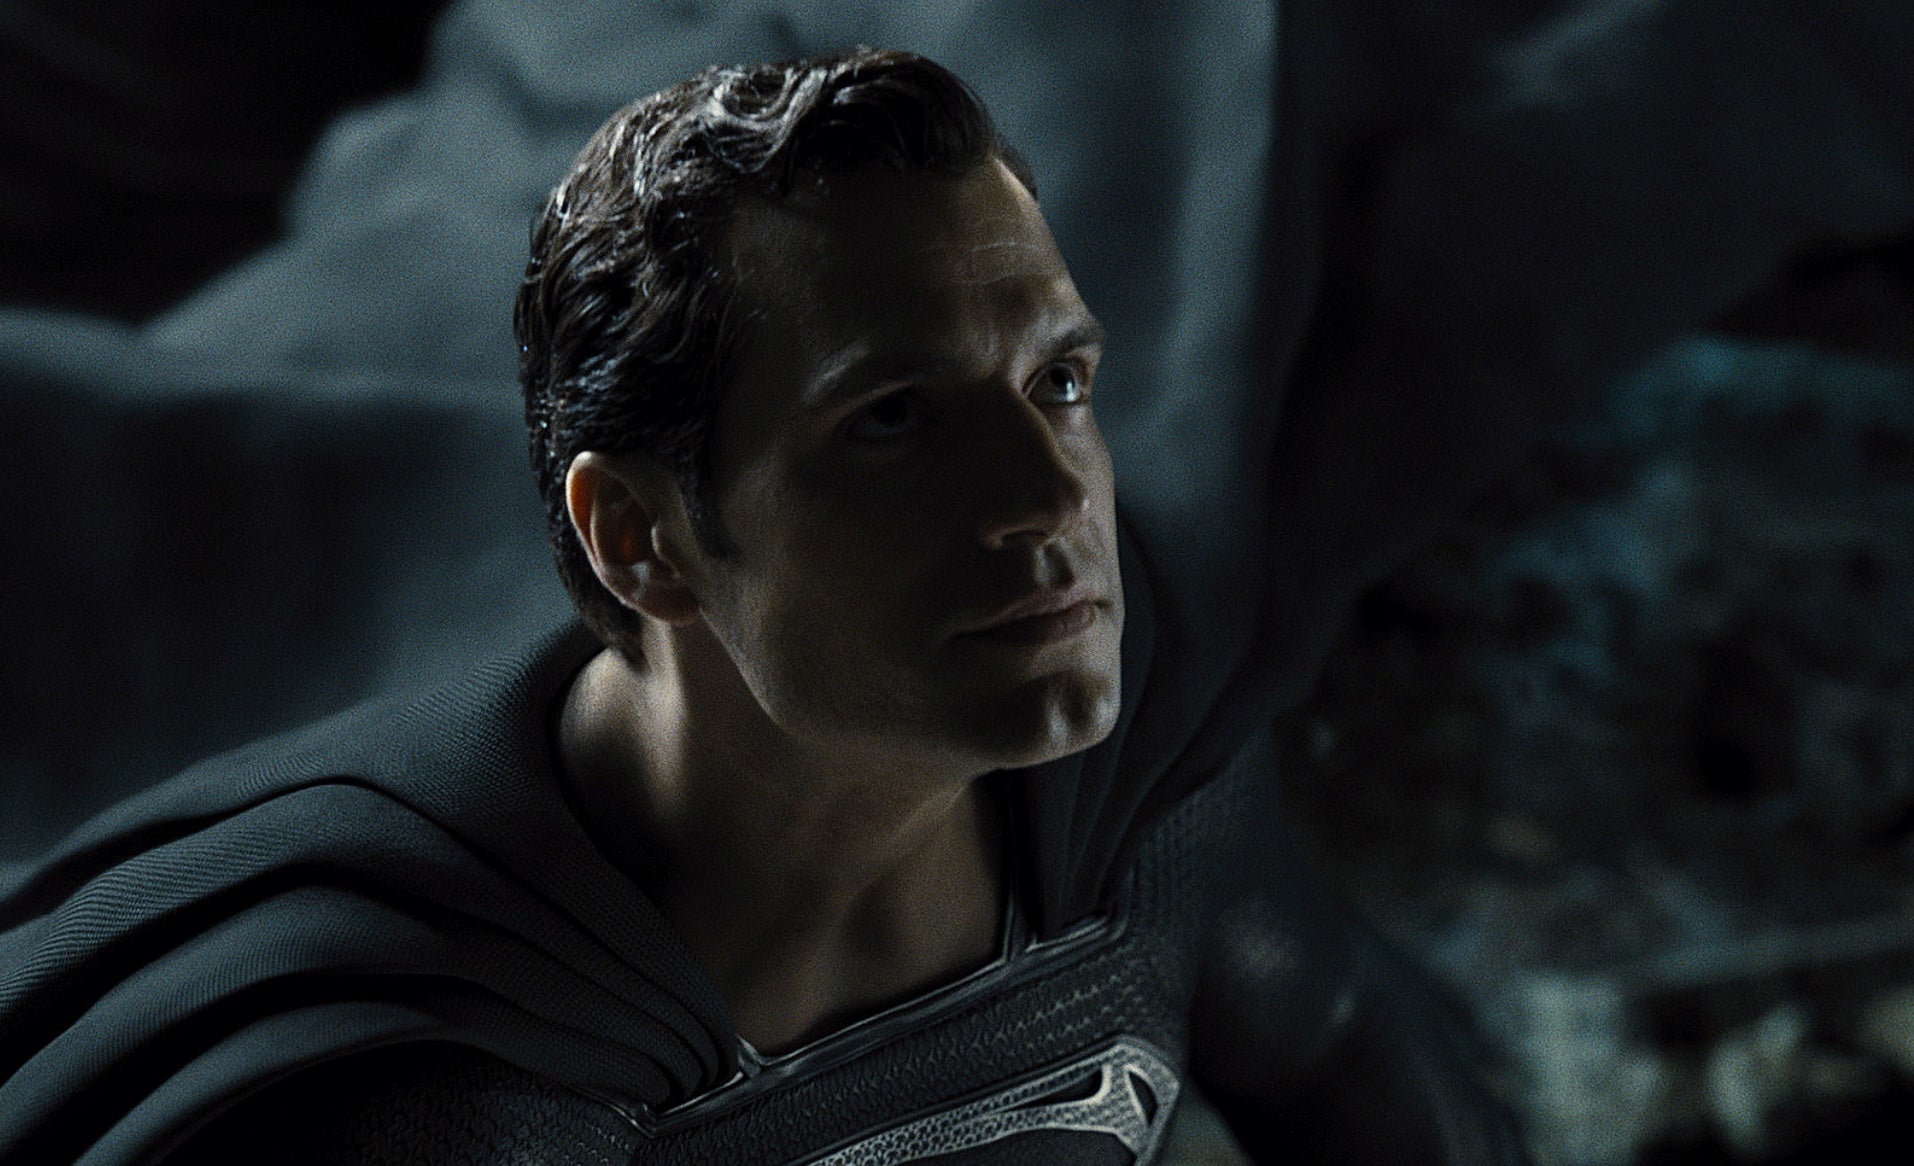 Henry Cavill in Zack Snyder's Justice League. (Image: Warner Bros.)